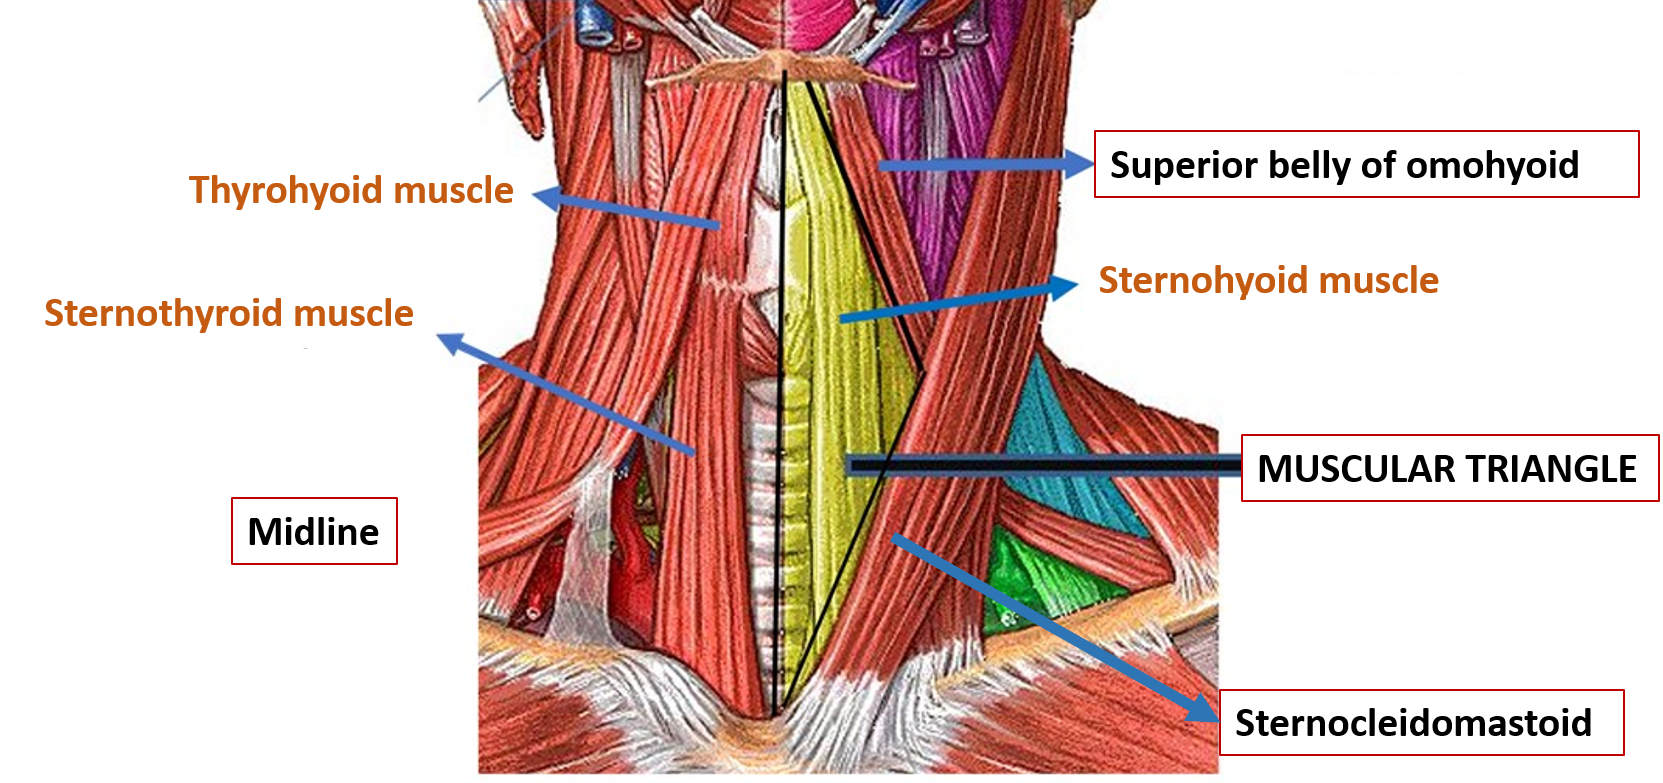 Boundaries of muscular triangle